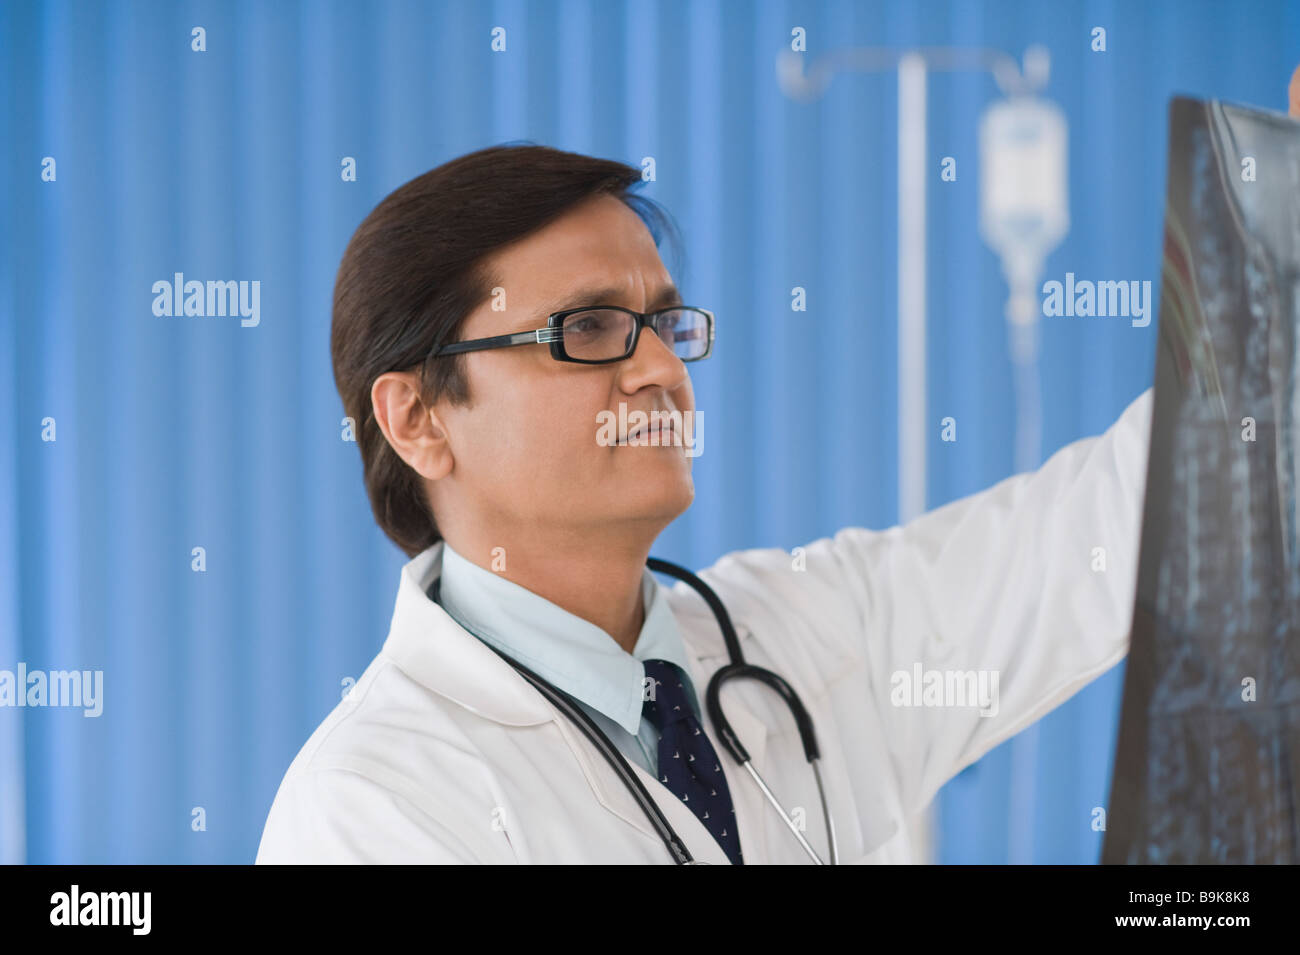 Doctor examining an x-ray report Stock Photo